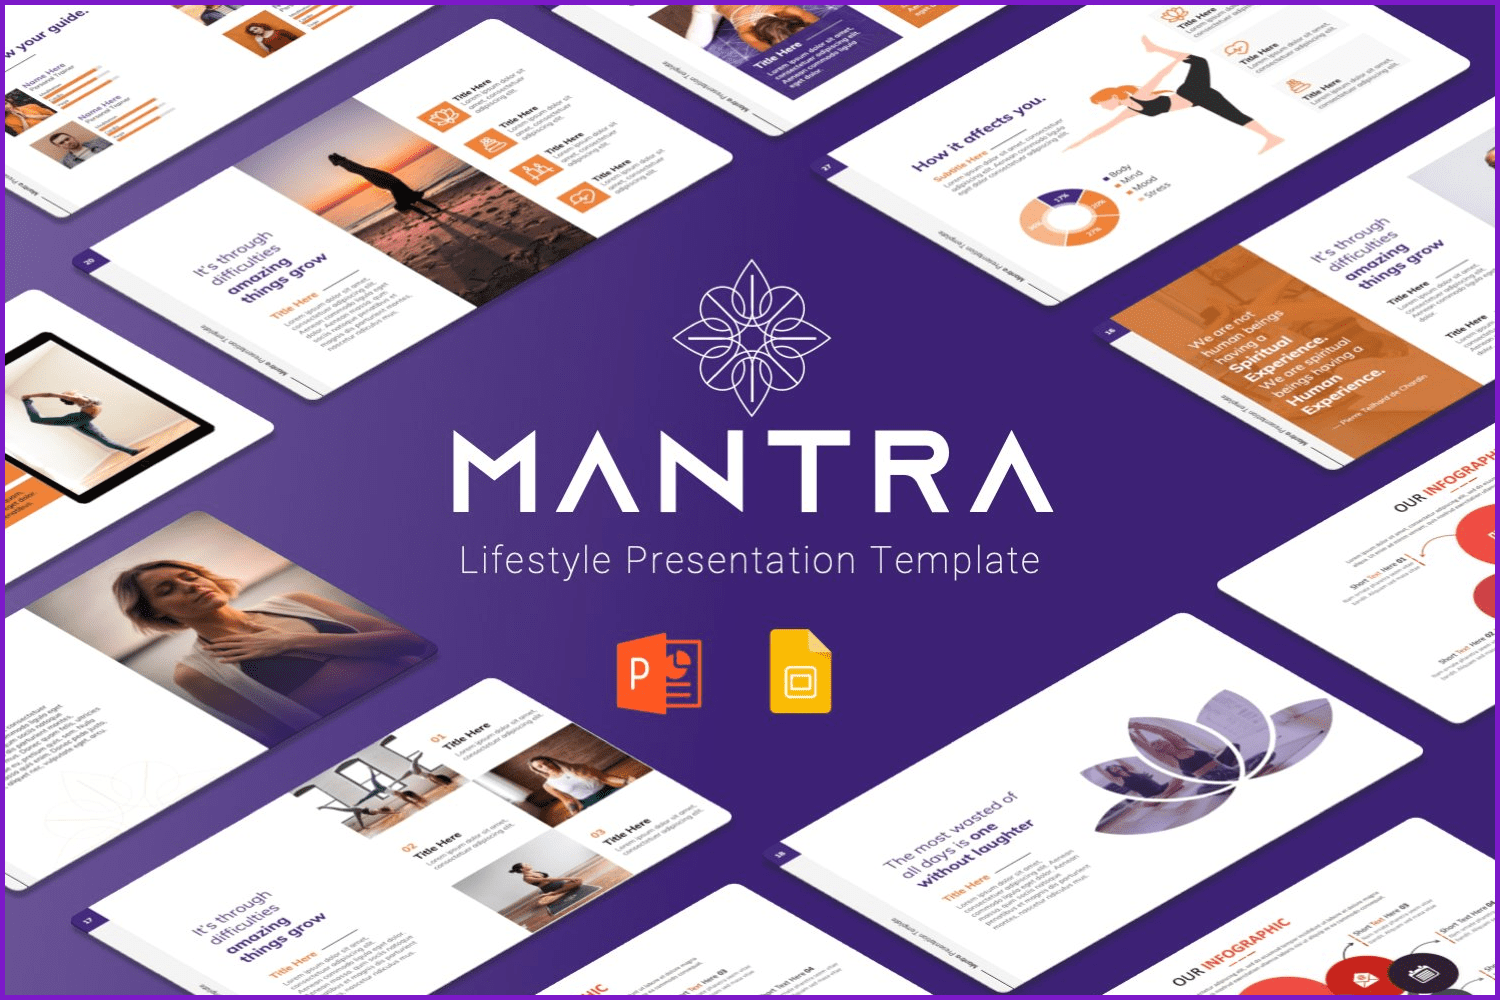 Mantra Lifestyle PPTX Template.